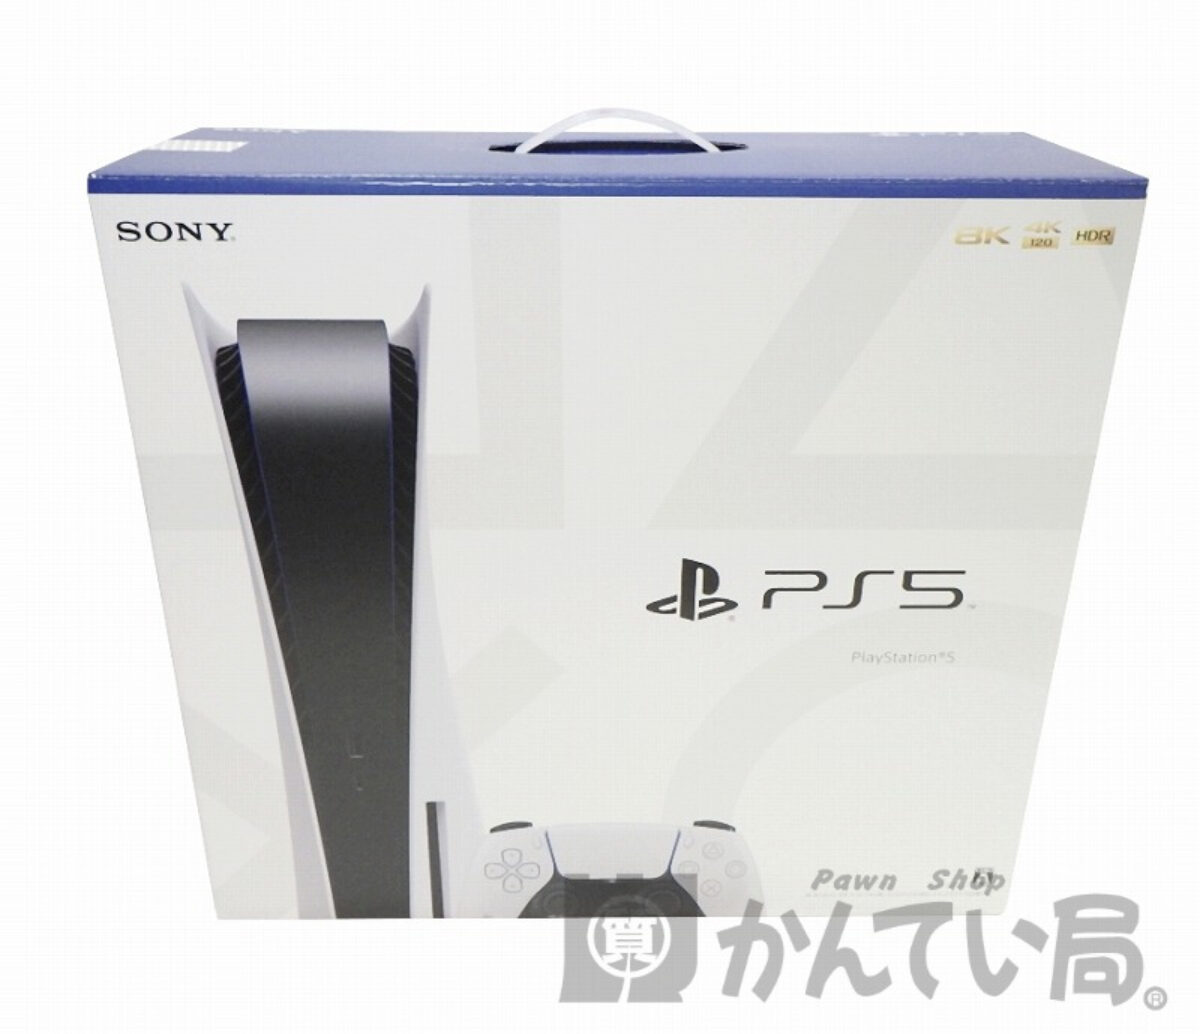 SONY　PlayStaion5　CFI1100A01_Opening prohibition tape_1